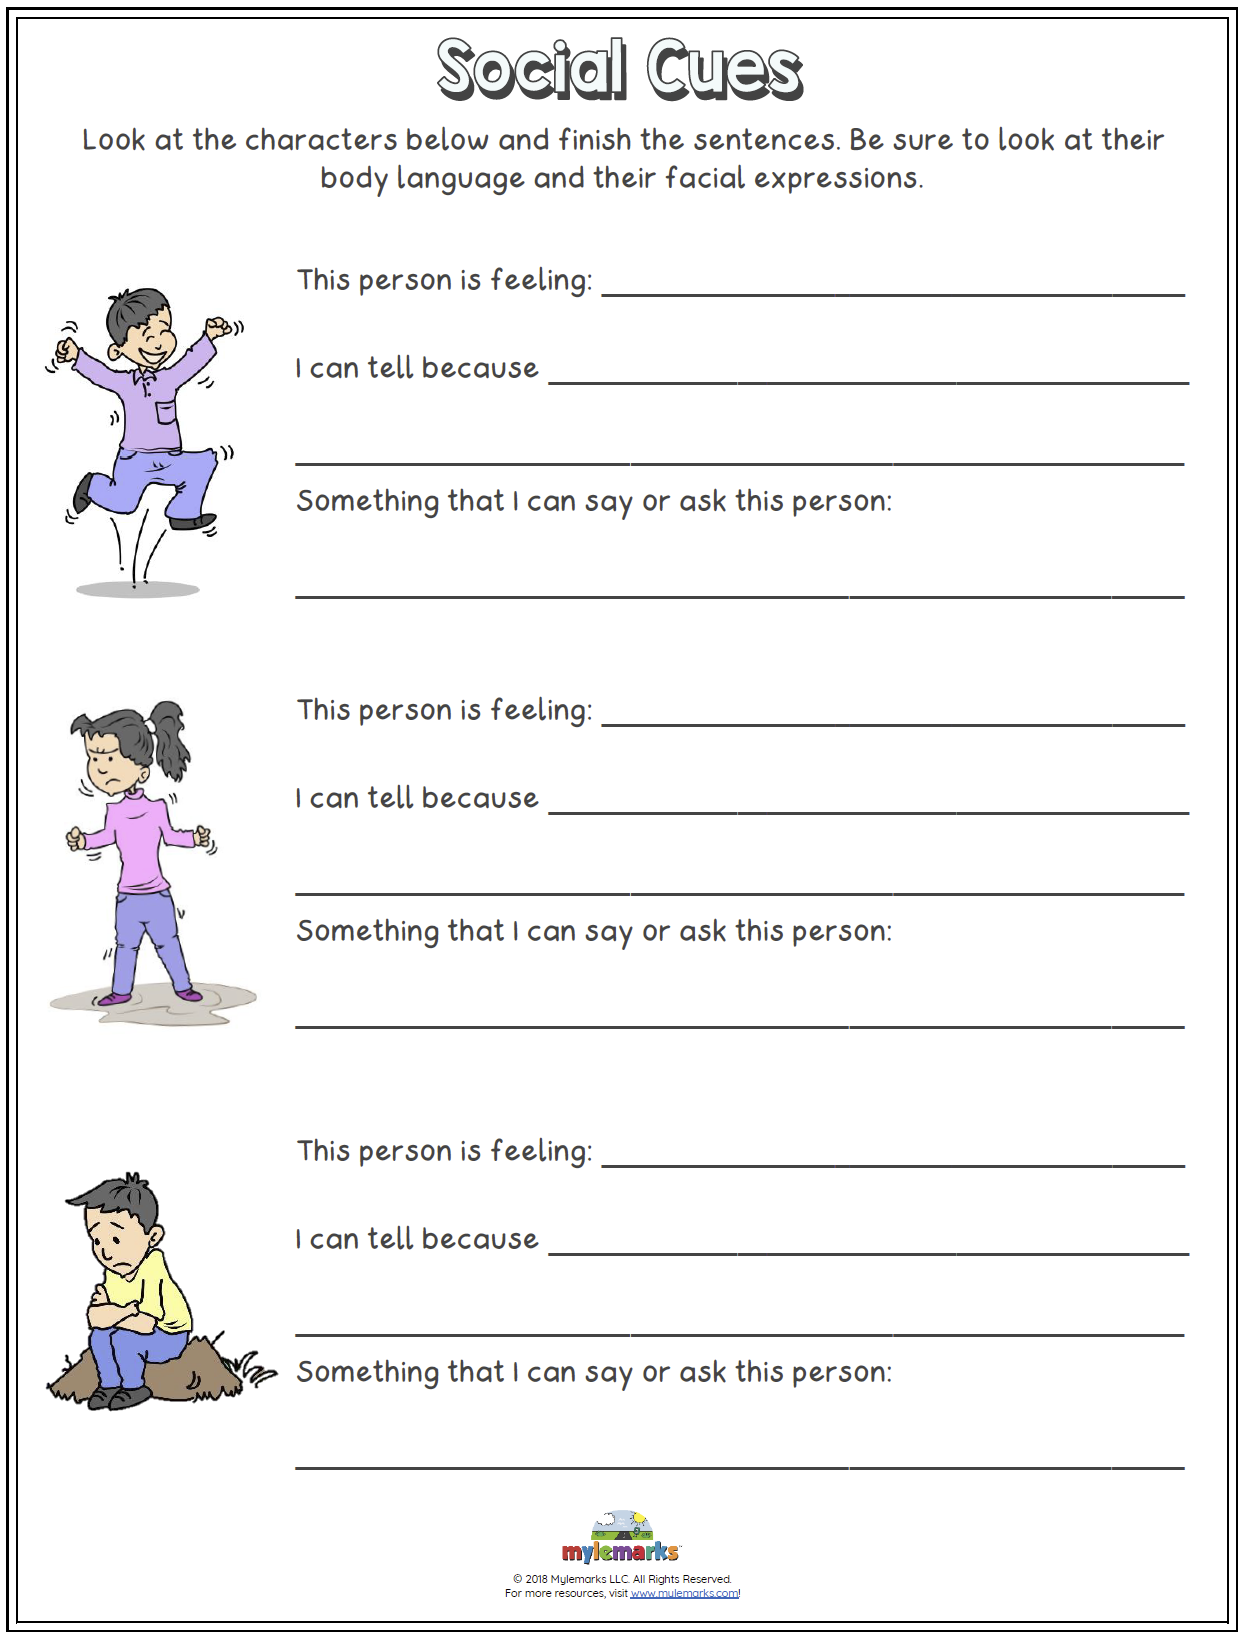 How Are My Social Skills? Worksheet for 5th - 12th Grade | Lesson 